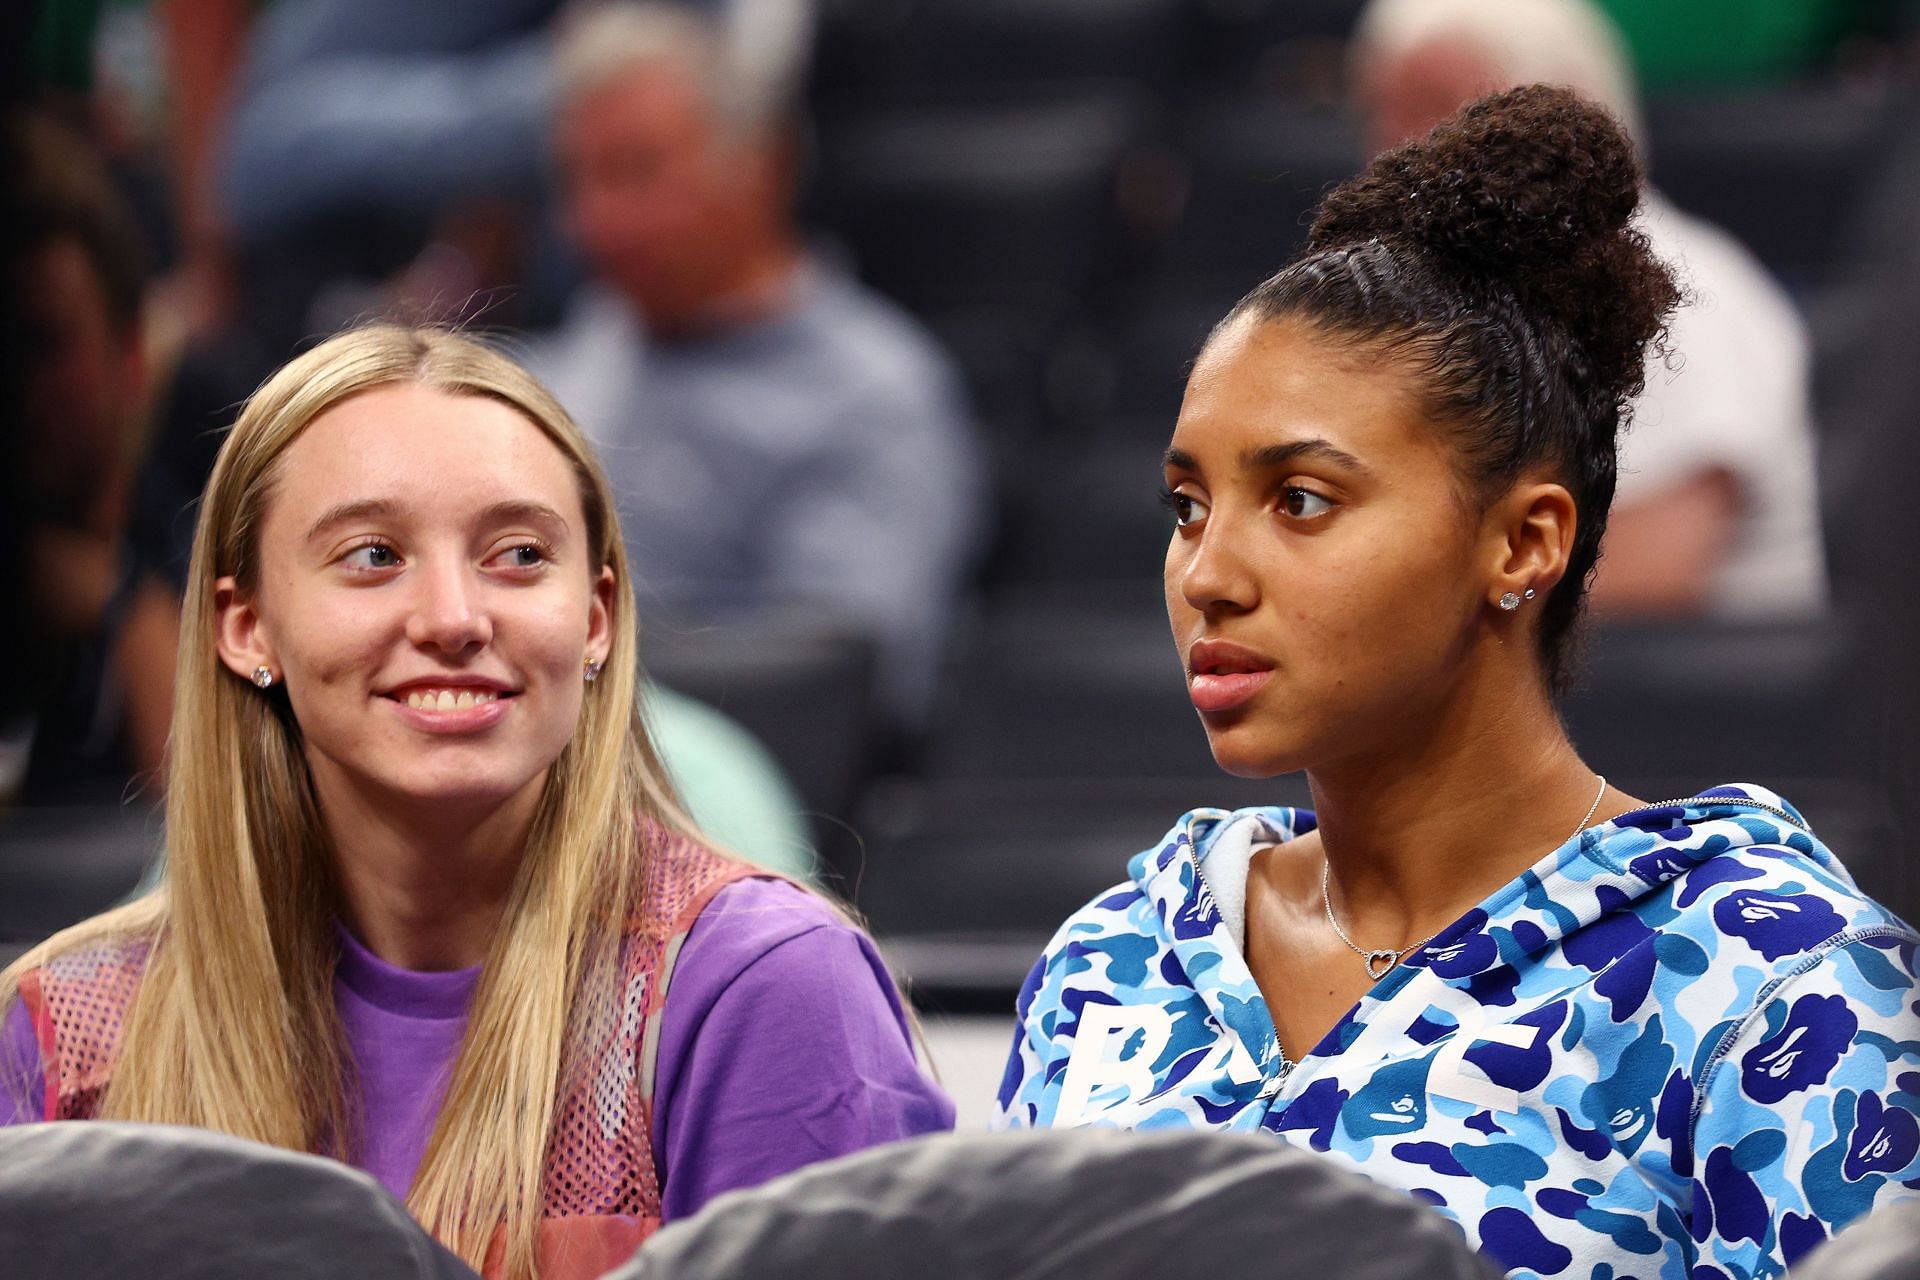 UConn teammates Paige Bueckers and Azzi Fudd watching the 2022 NBA Finals.